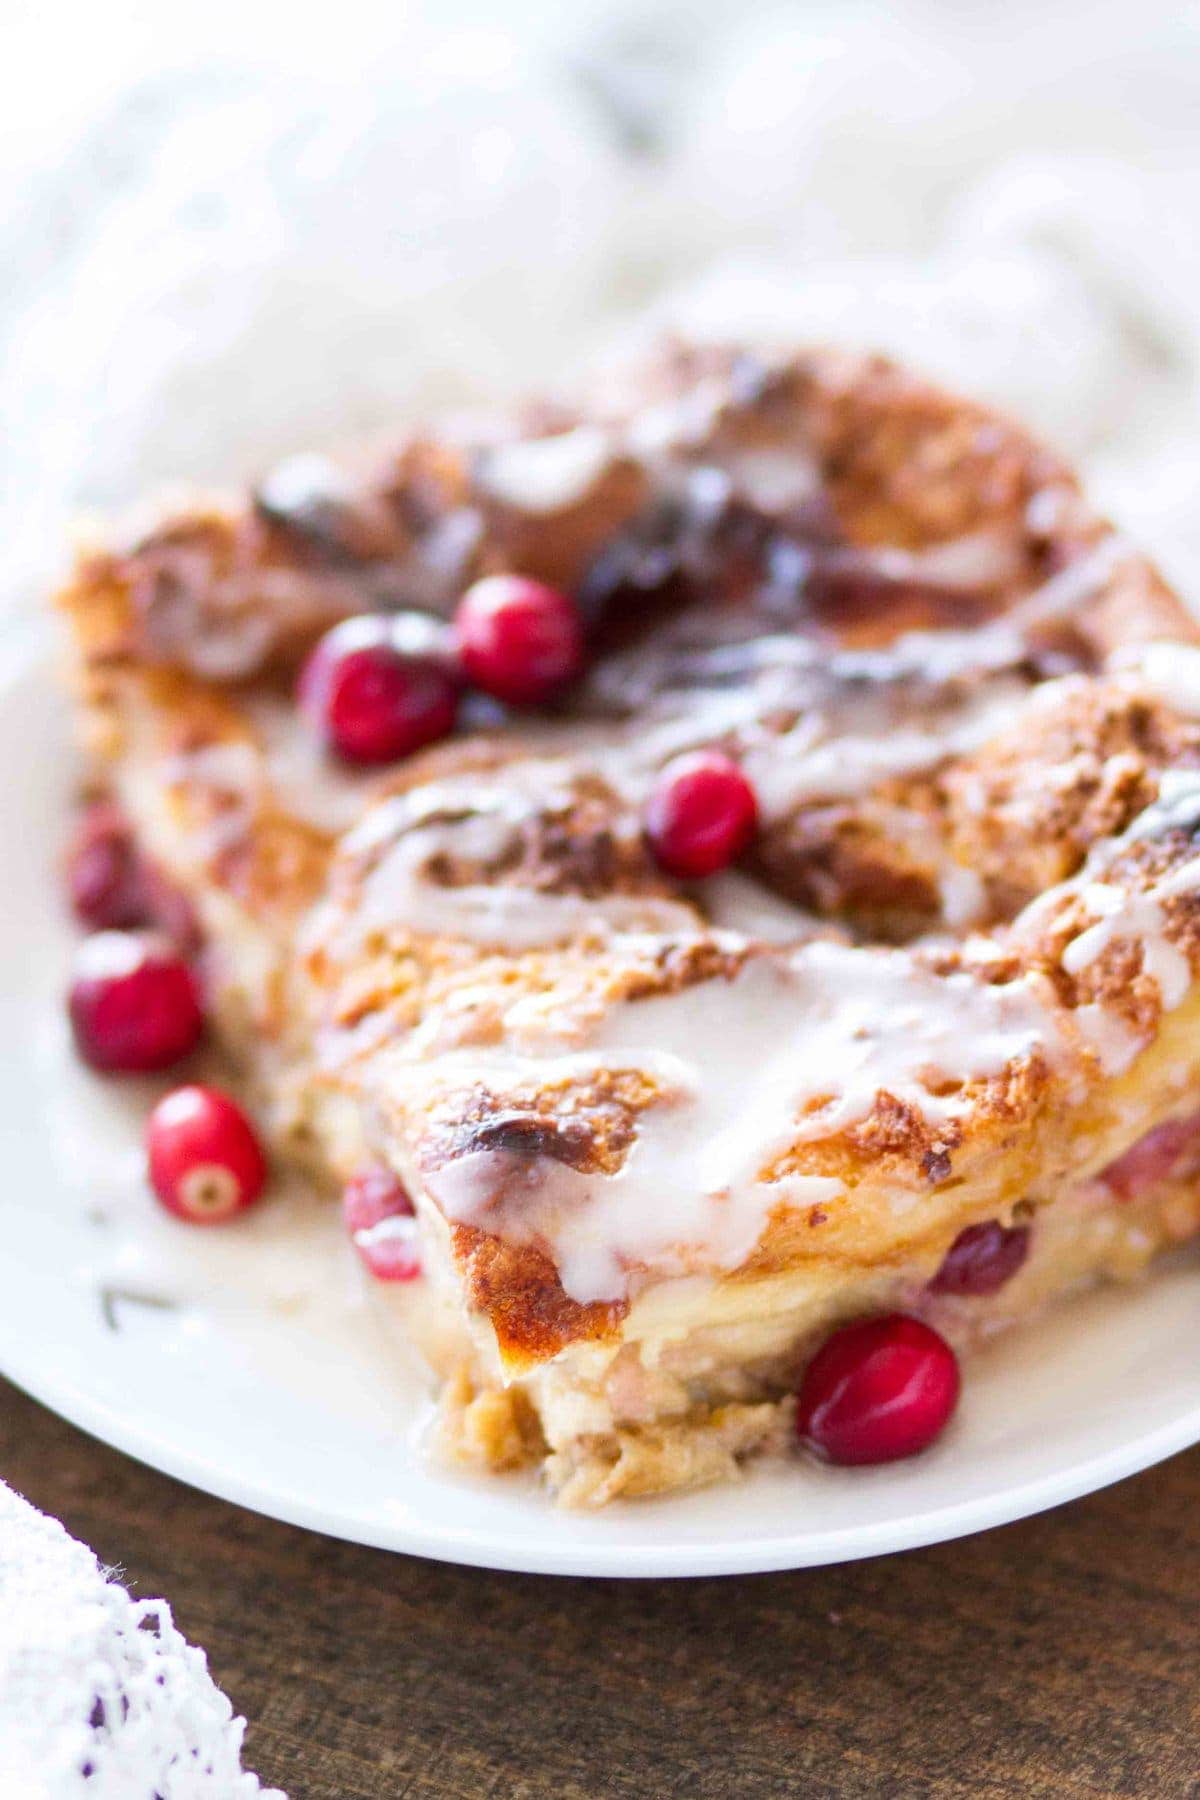 This easy homemade Cranberry Orange Bread Pudding is topped with an orange glaze, and is the perfect holiday dessert! This bread pudding recipe comes together quickly and is a total crowd pleaser!